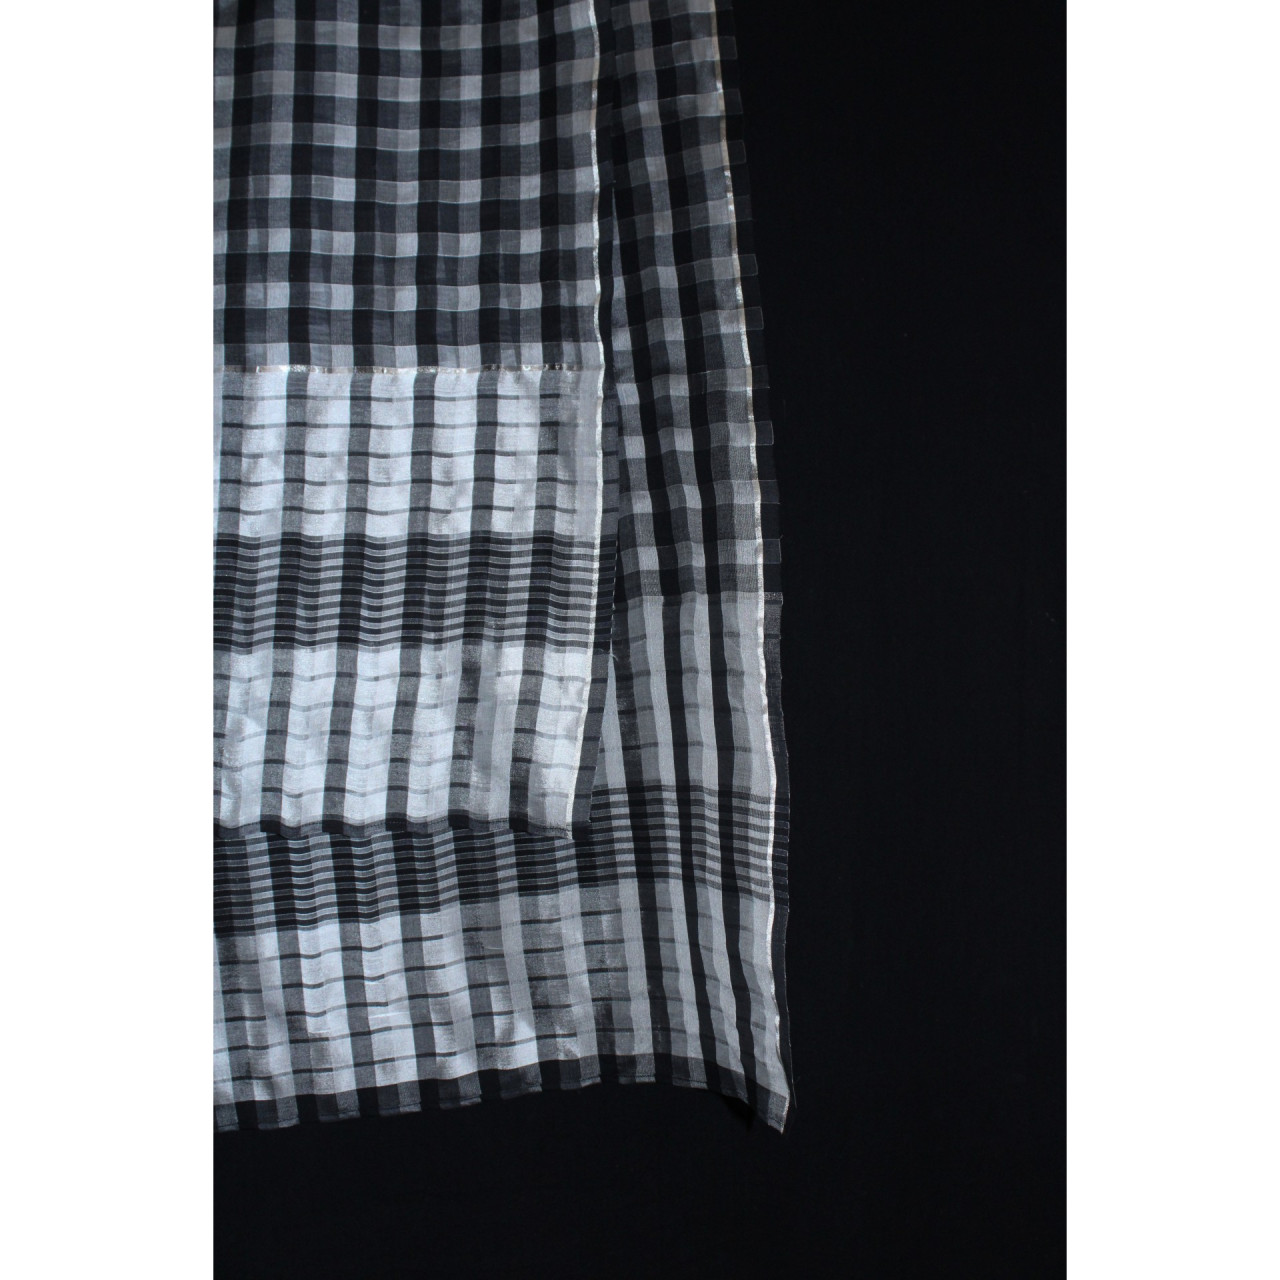 (2174) Mulberry silk and cotton Azo-free dyed stole from Maheshwar - Black, checks, silver, silver zari, stripes